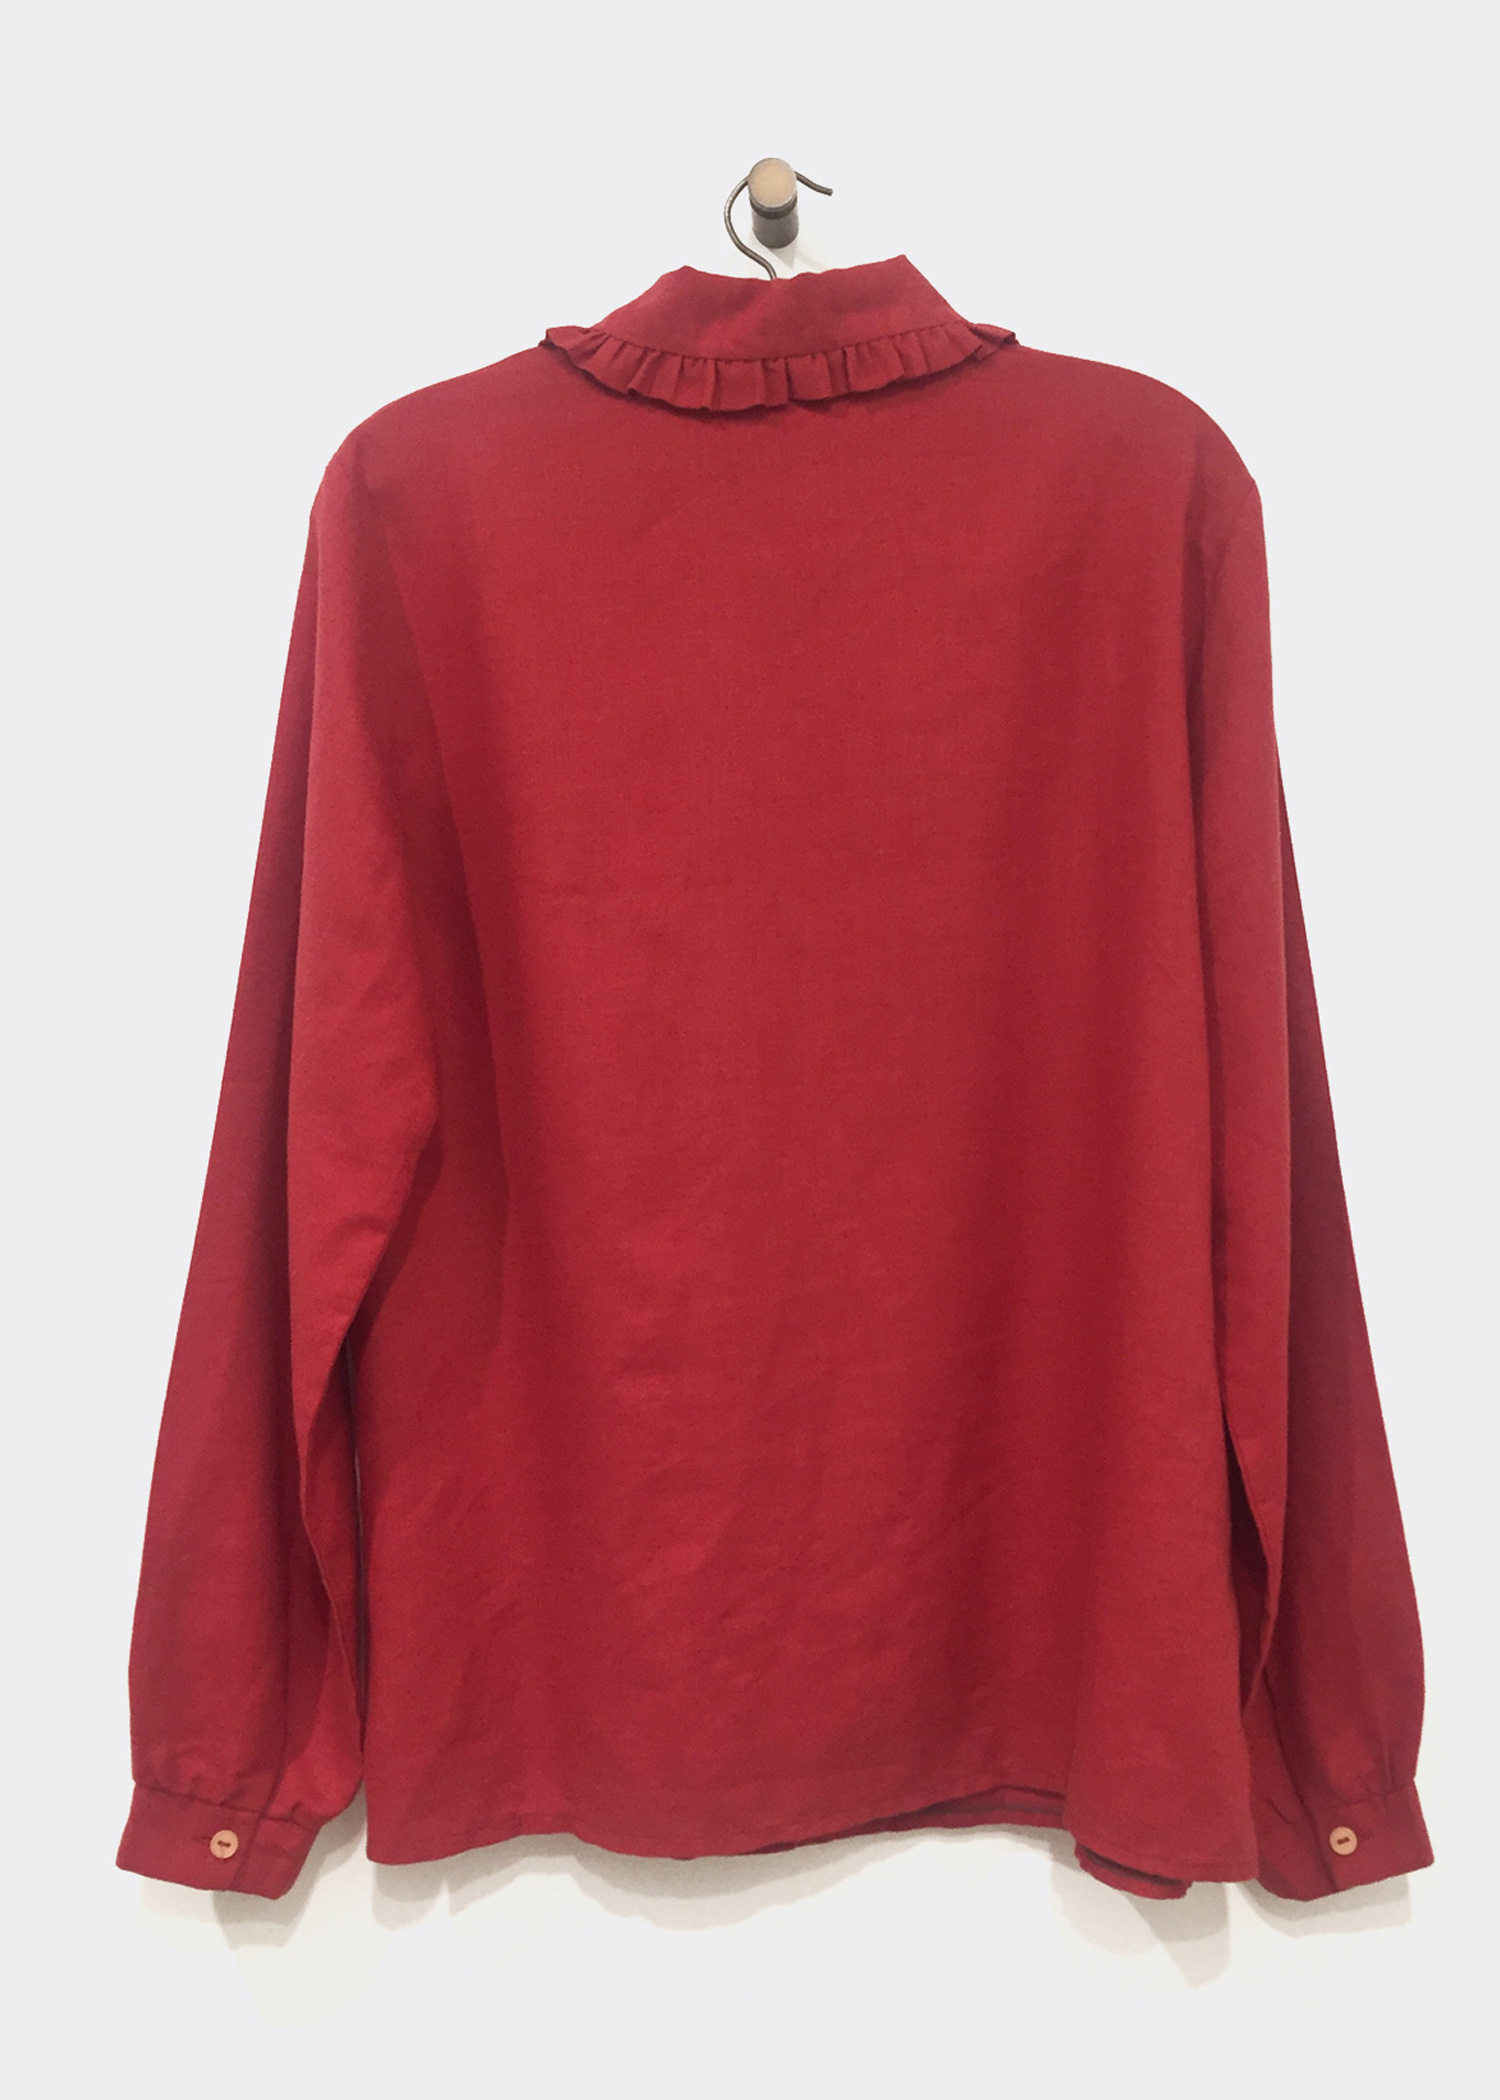 Red Vintage Blouse with Ruffle Collar – Jimmy Buffalo